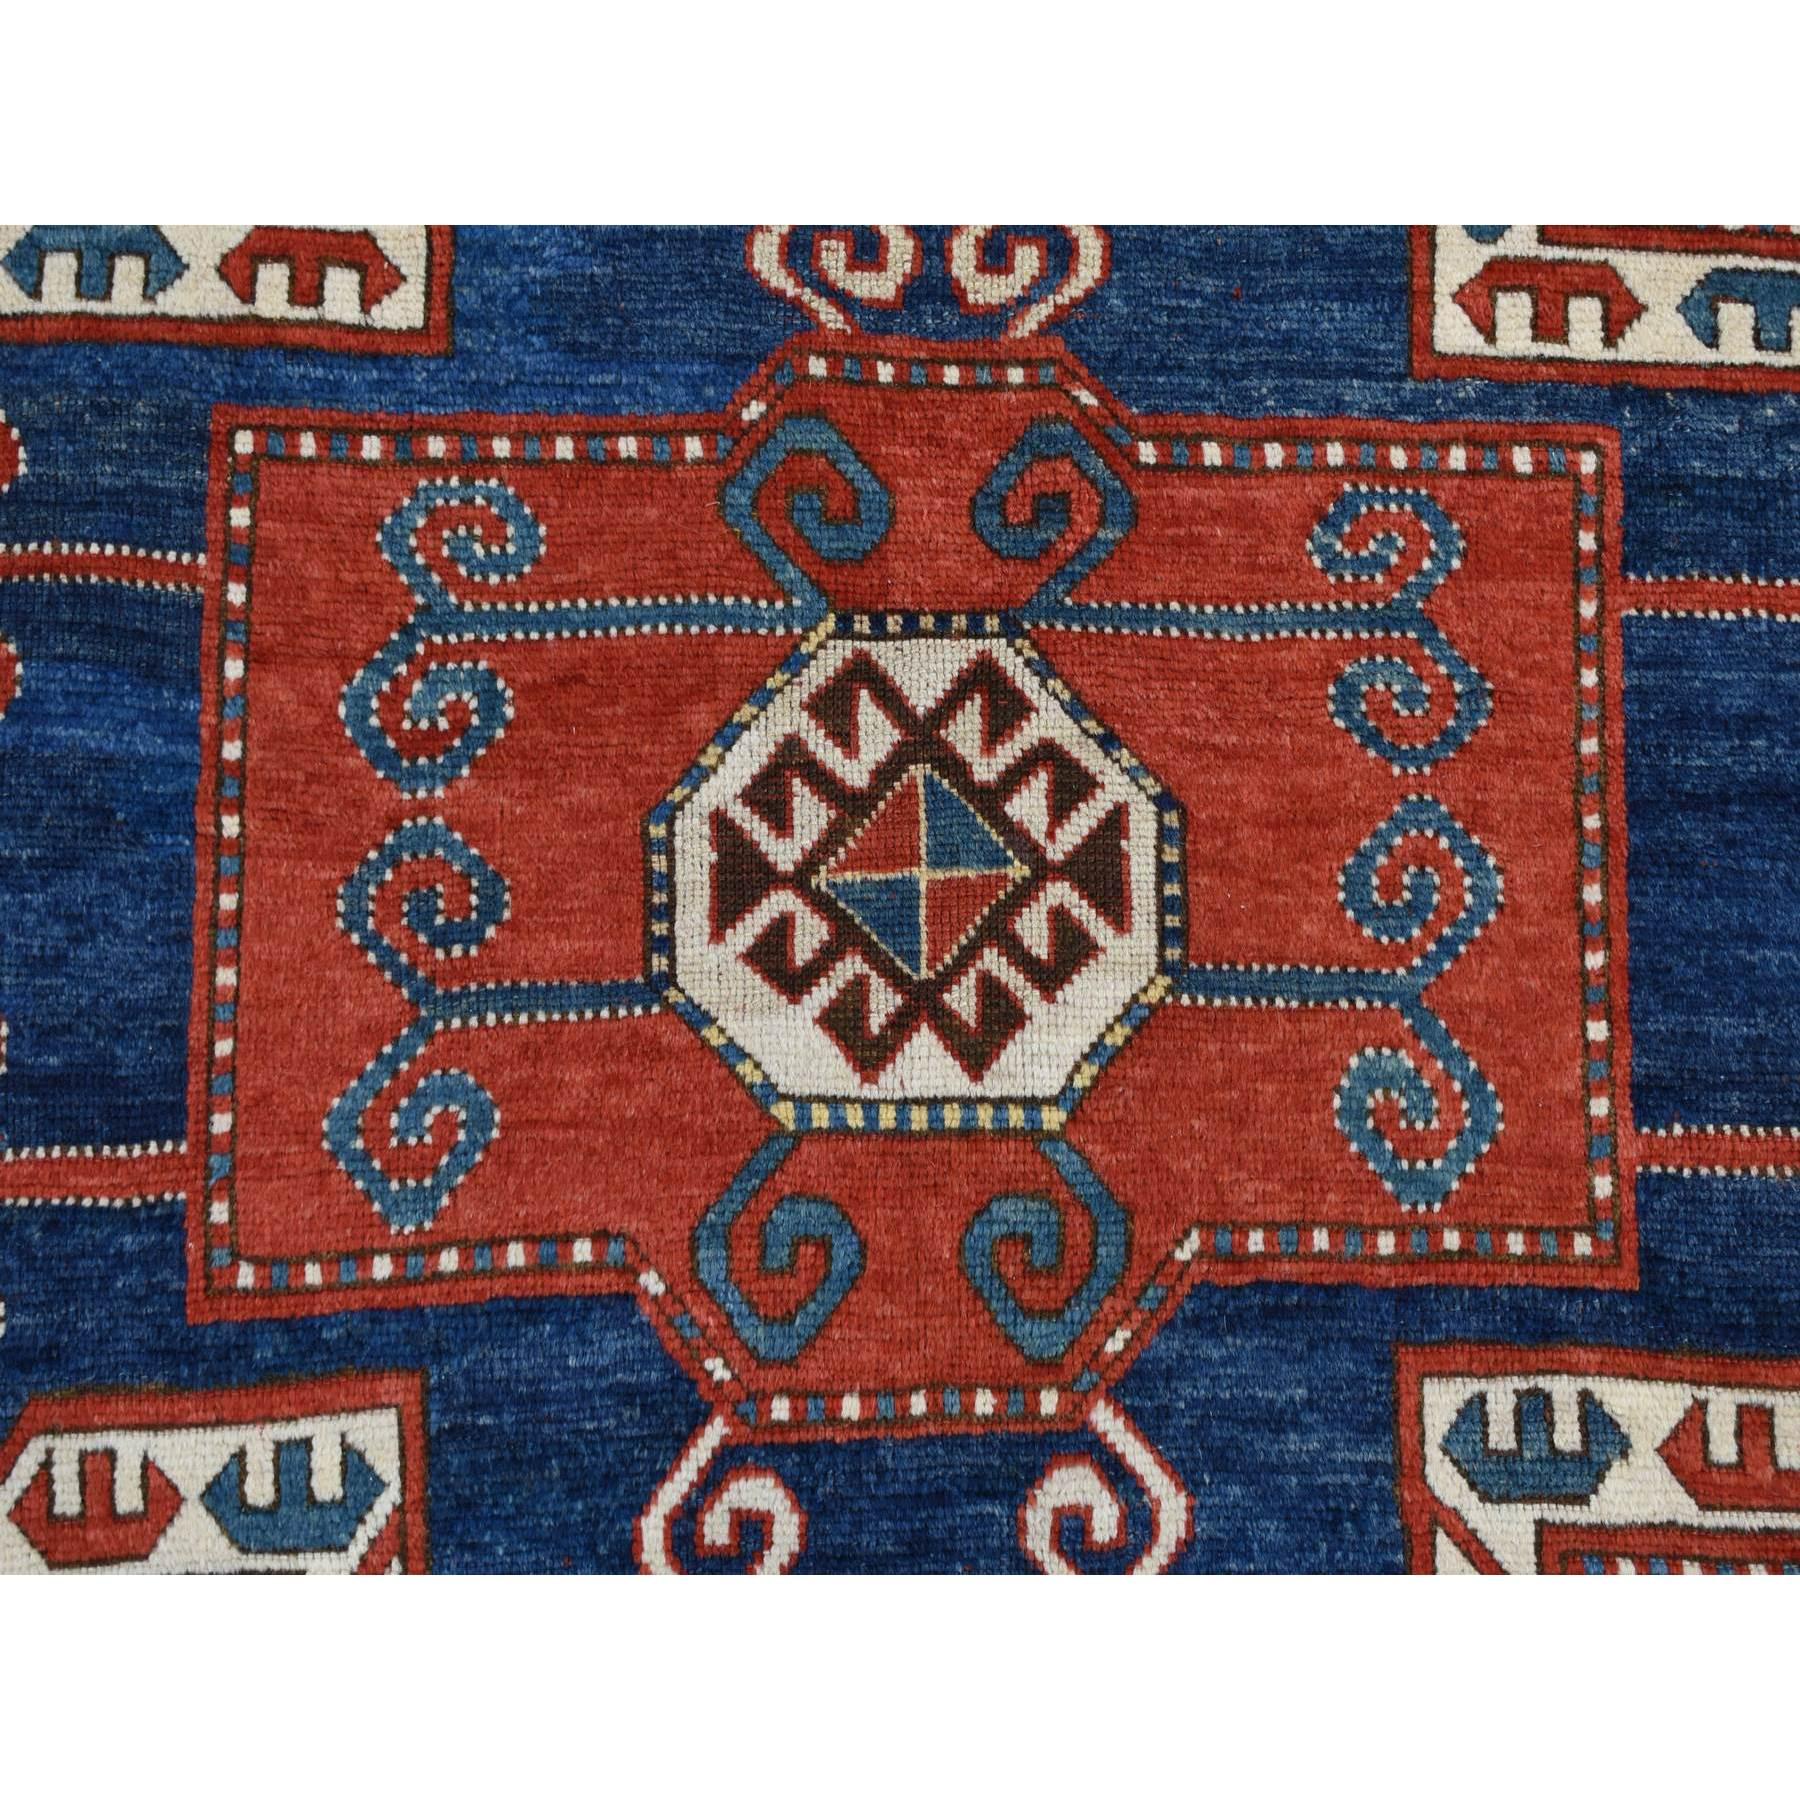 Late 19th Century Red Antique Caucasian Swan Kazak No Repairs Wool Hand knotted Rug 6'10